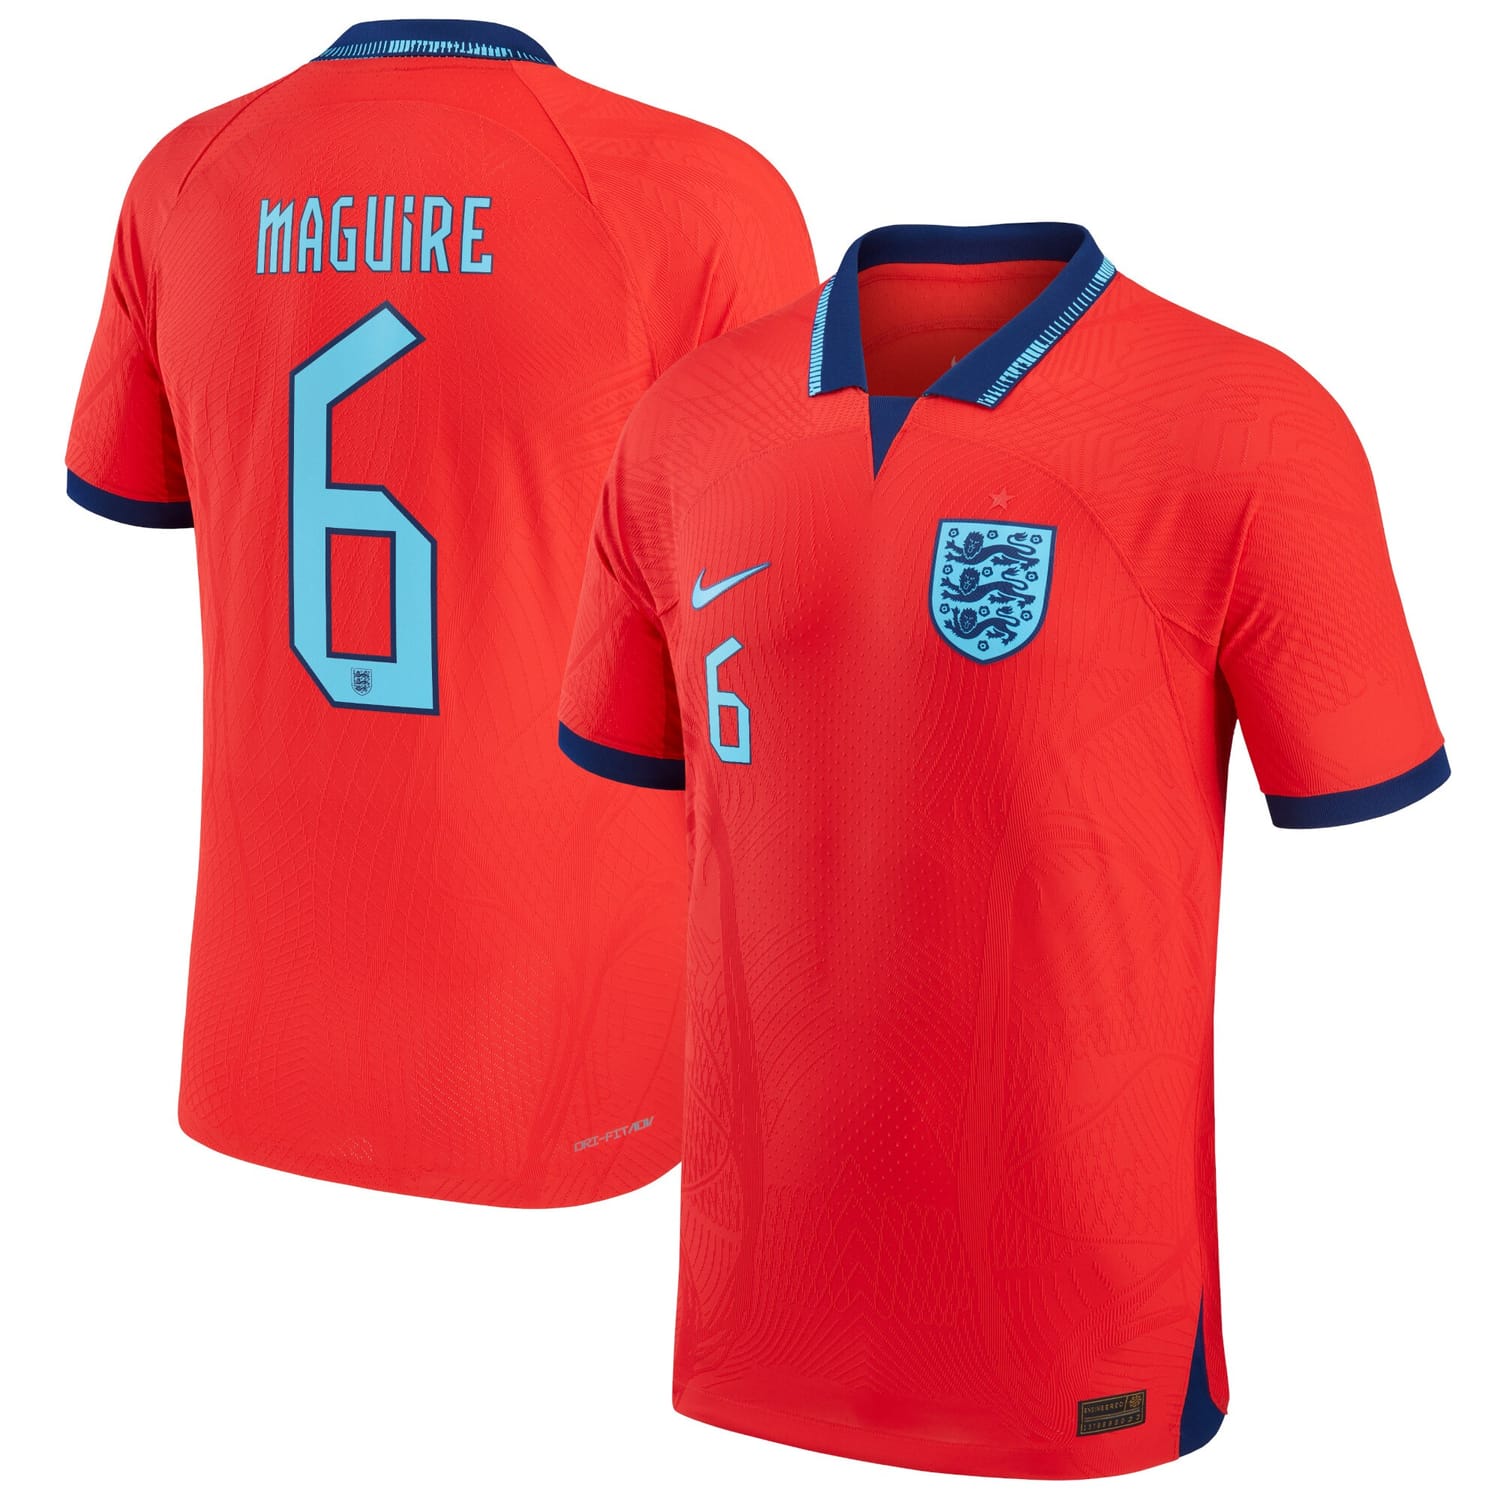 England National Team Away Authentic Jersey Shirt 2022 player Harry Maguire 6 printing for Men